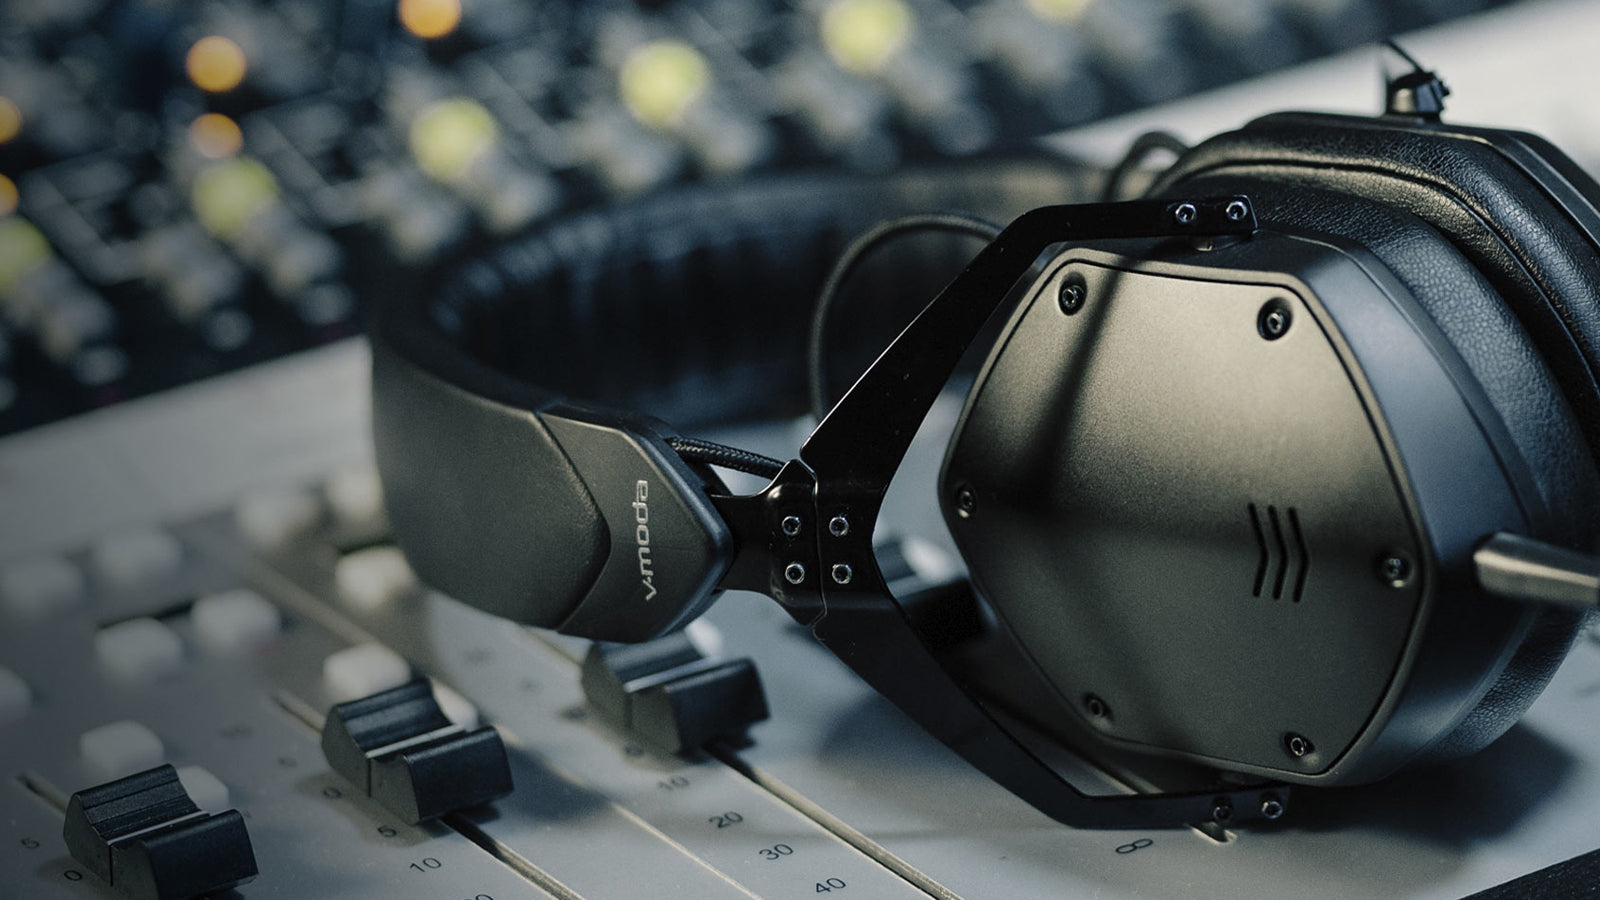 A pair of V-Moda headphones on a mixing console in a recording studio